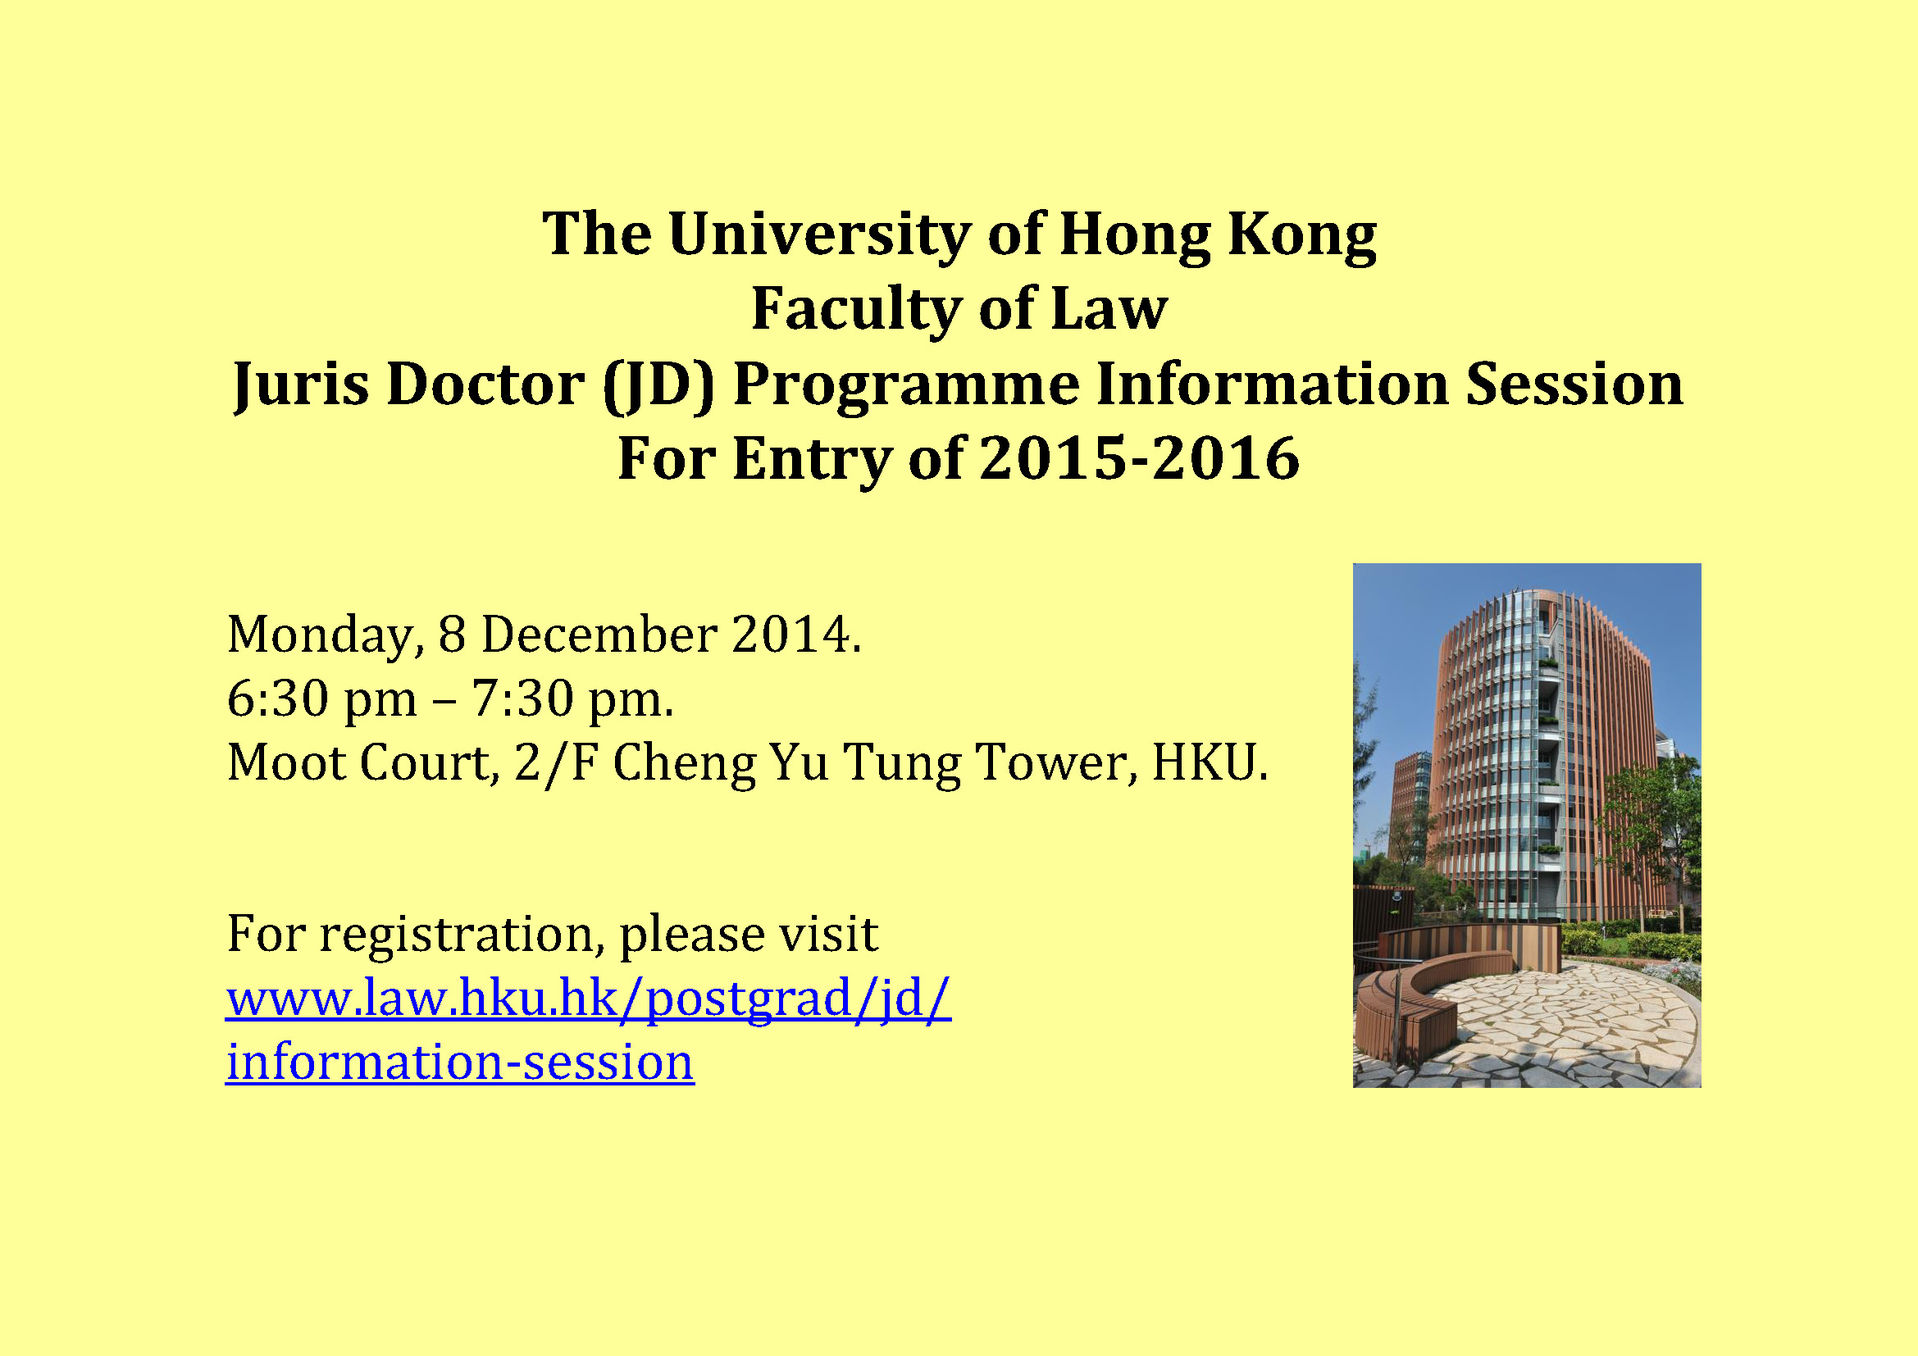 JD Information Session for Entry in 2015-2016